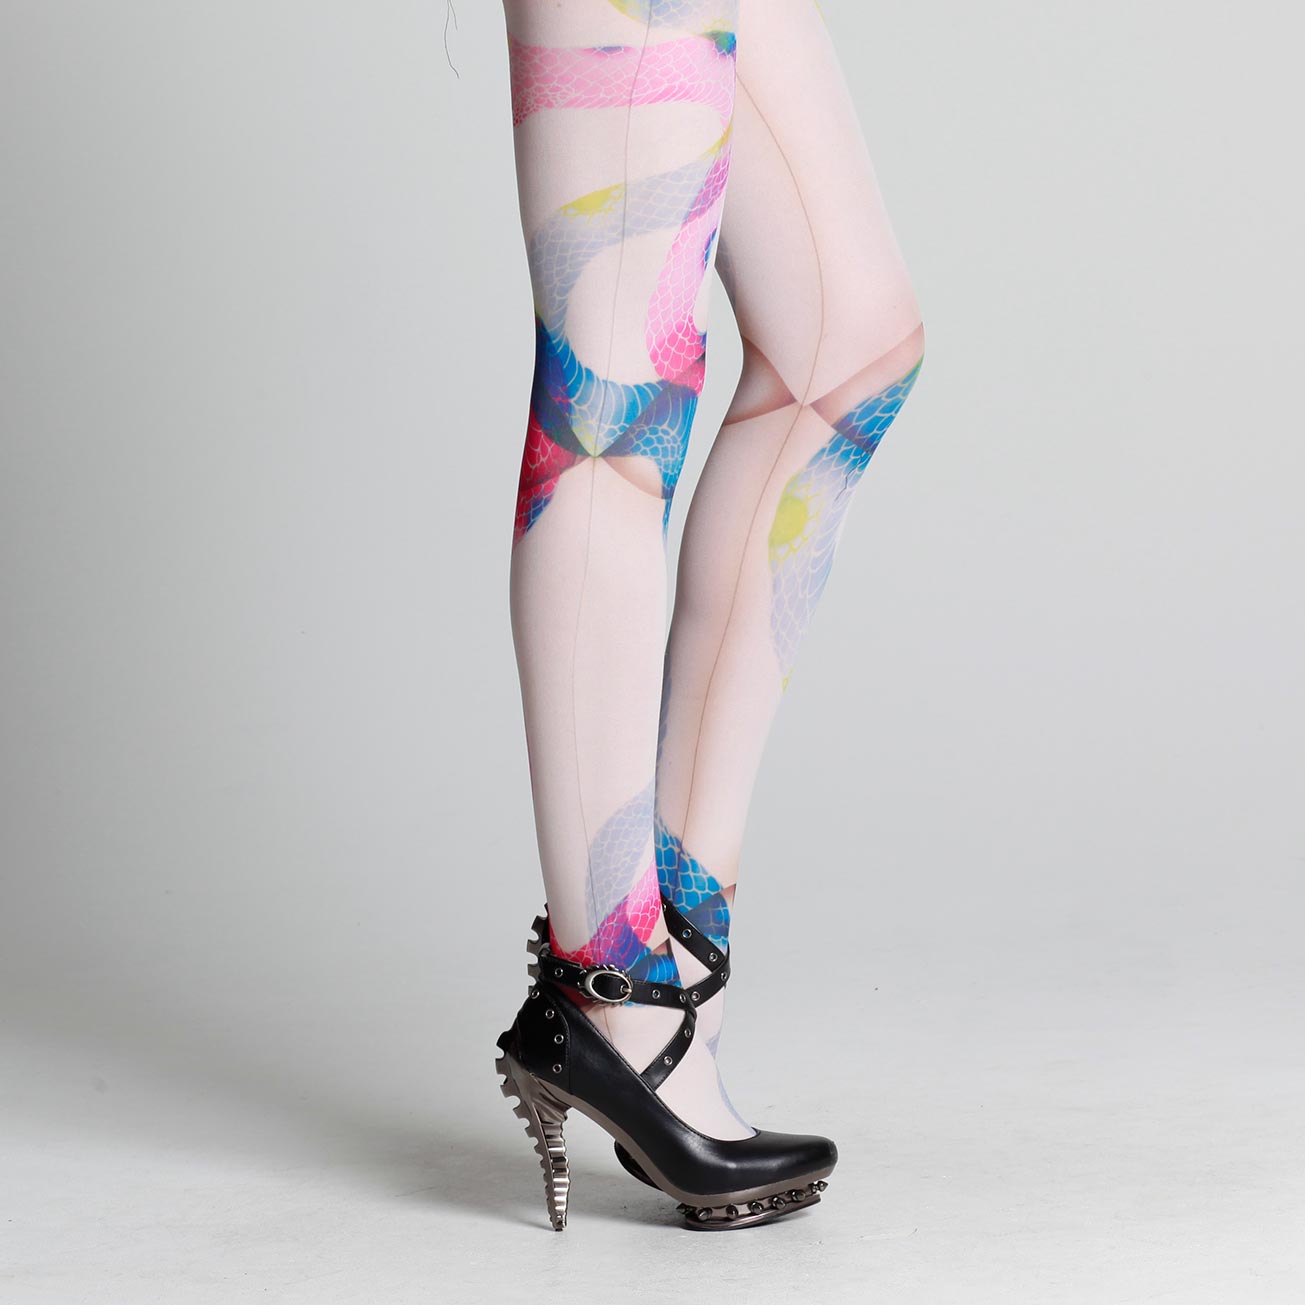 NEW Cyan One Size Snake Full Length Printed Tights Closed Toe Pantyhose  Tattoo Tights by Tattoo Socks -  Canada